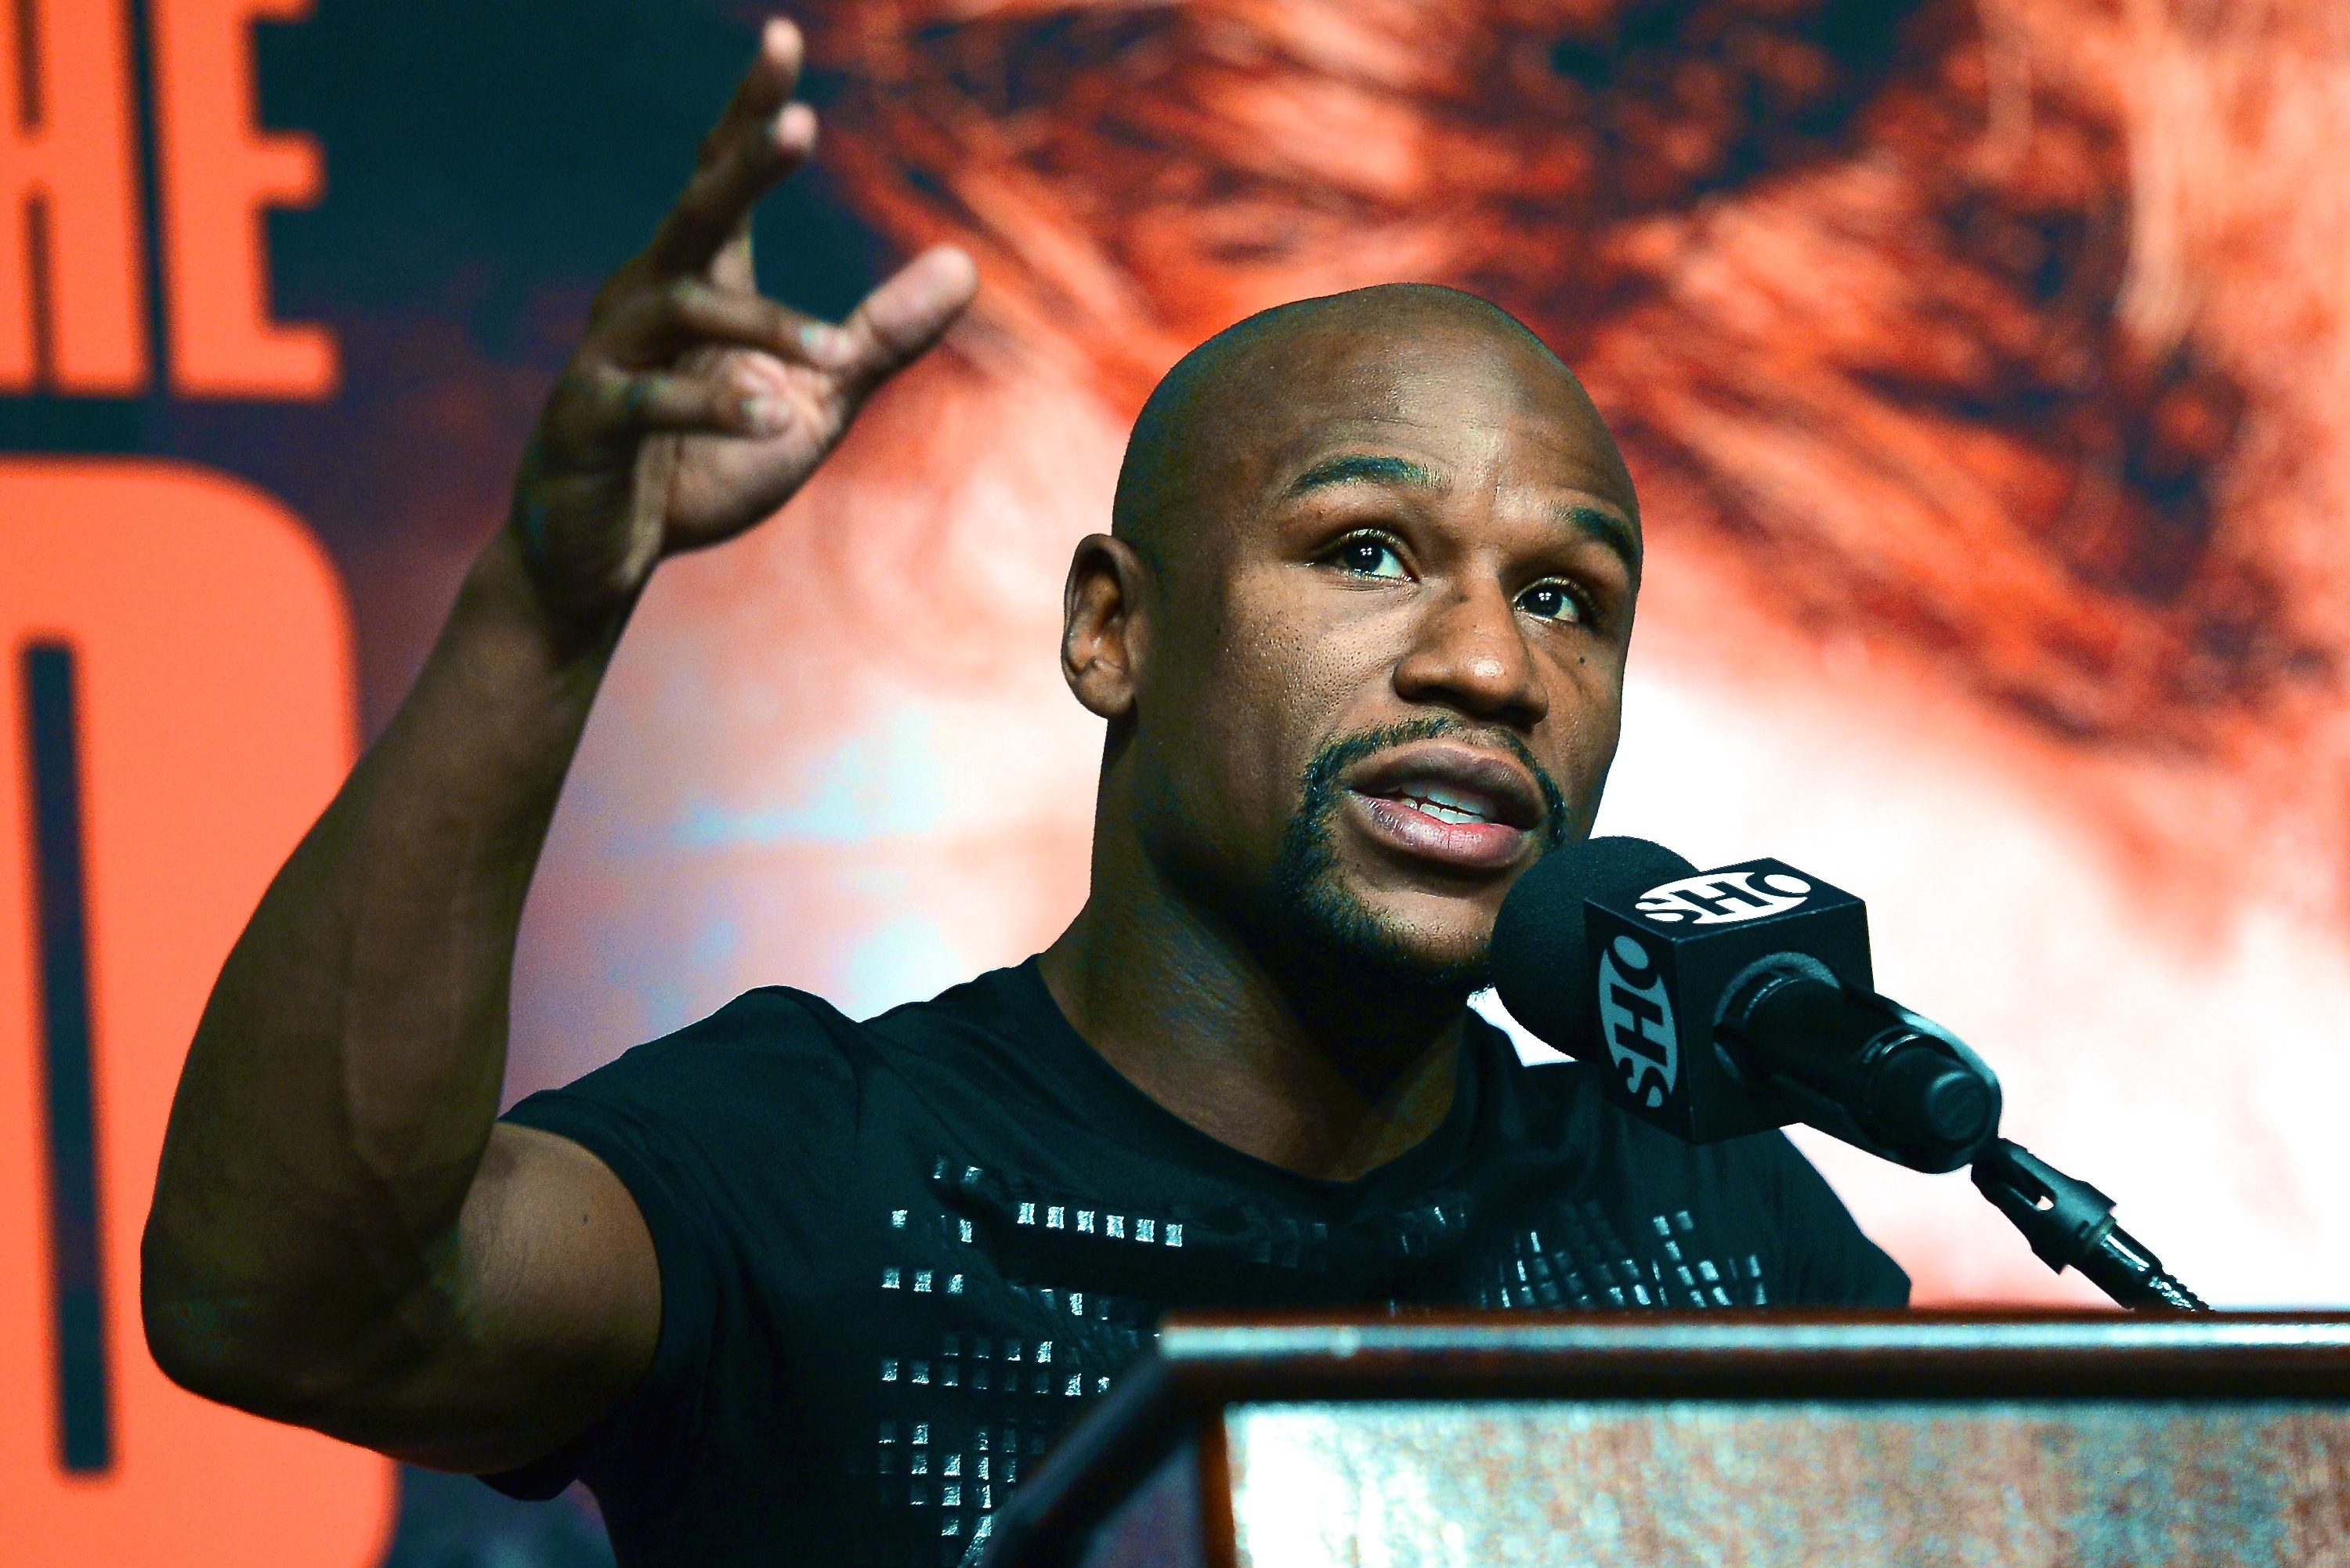 Floyd Mayweather could bank $20 million in clothing endorsements alone